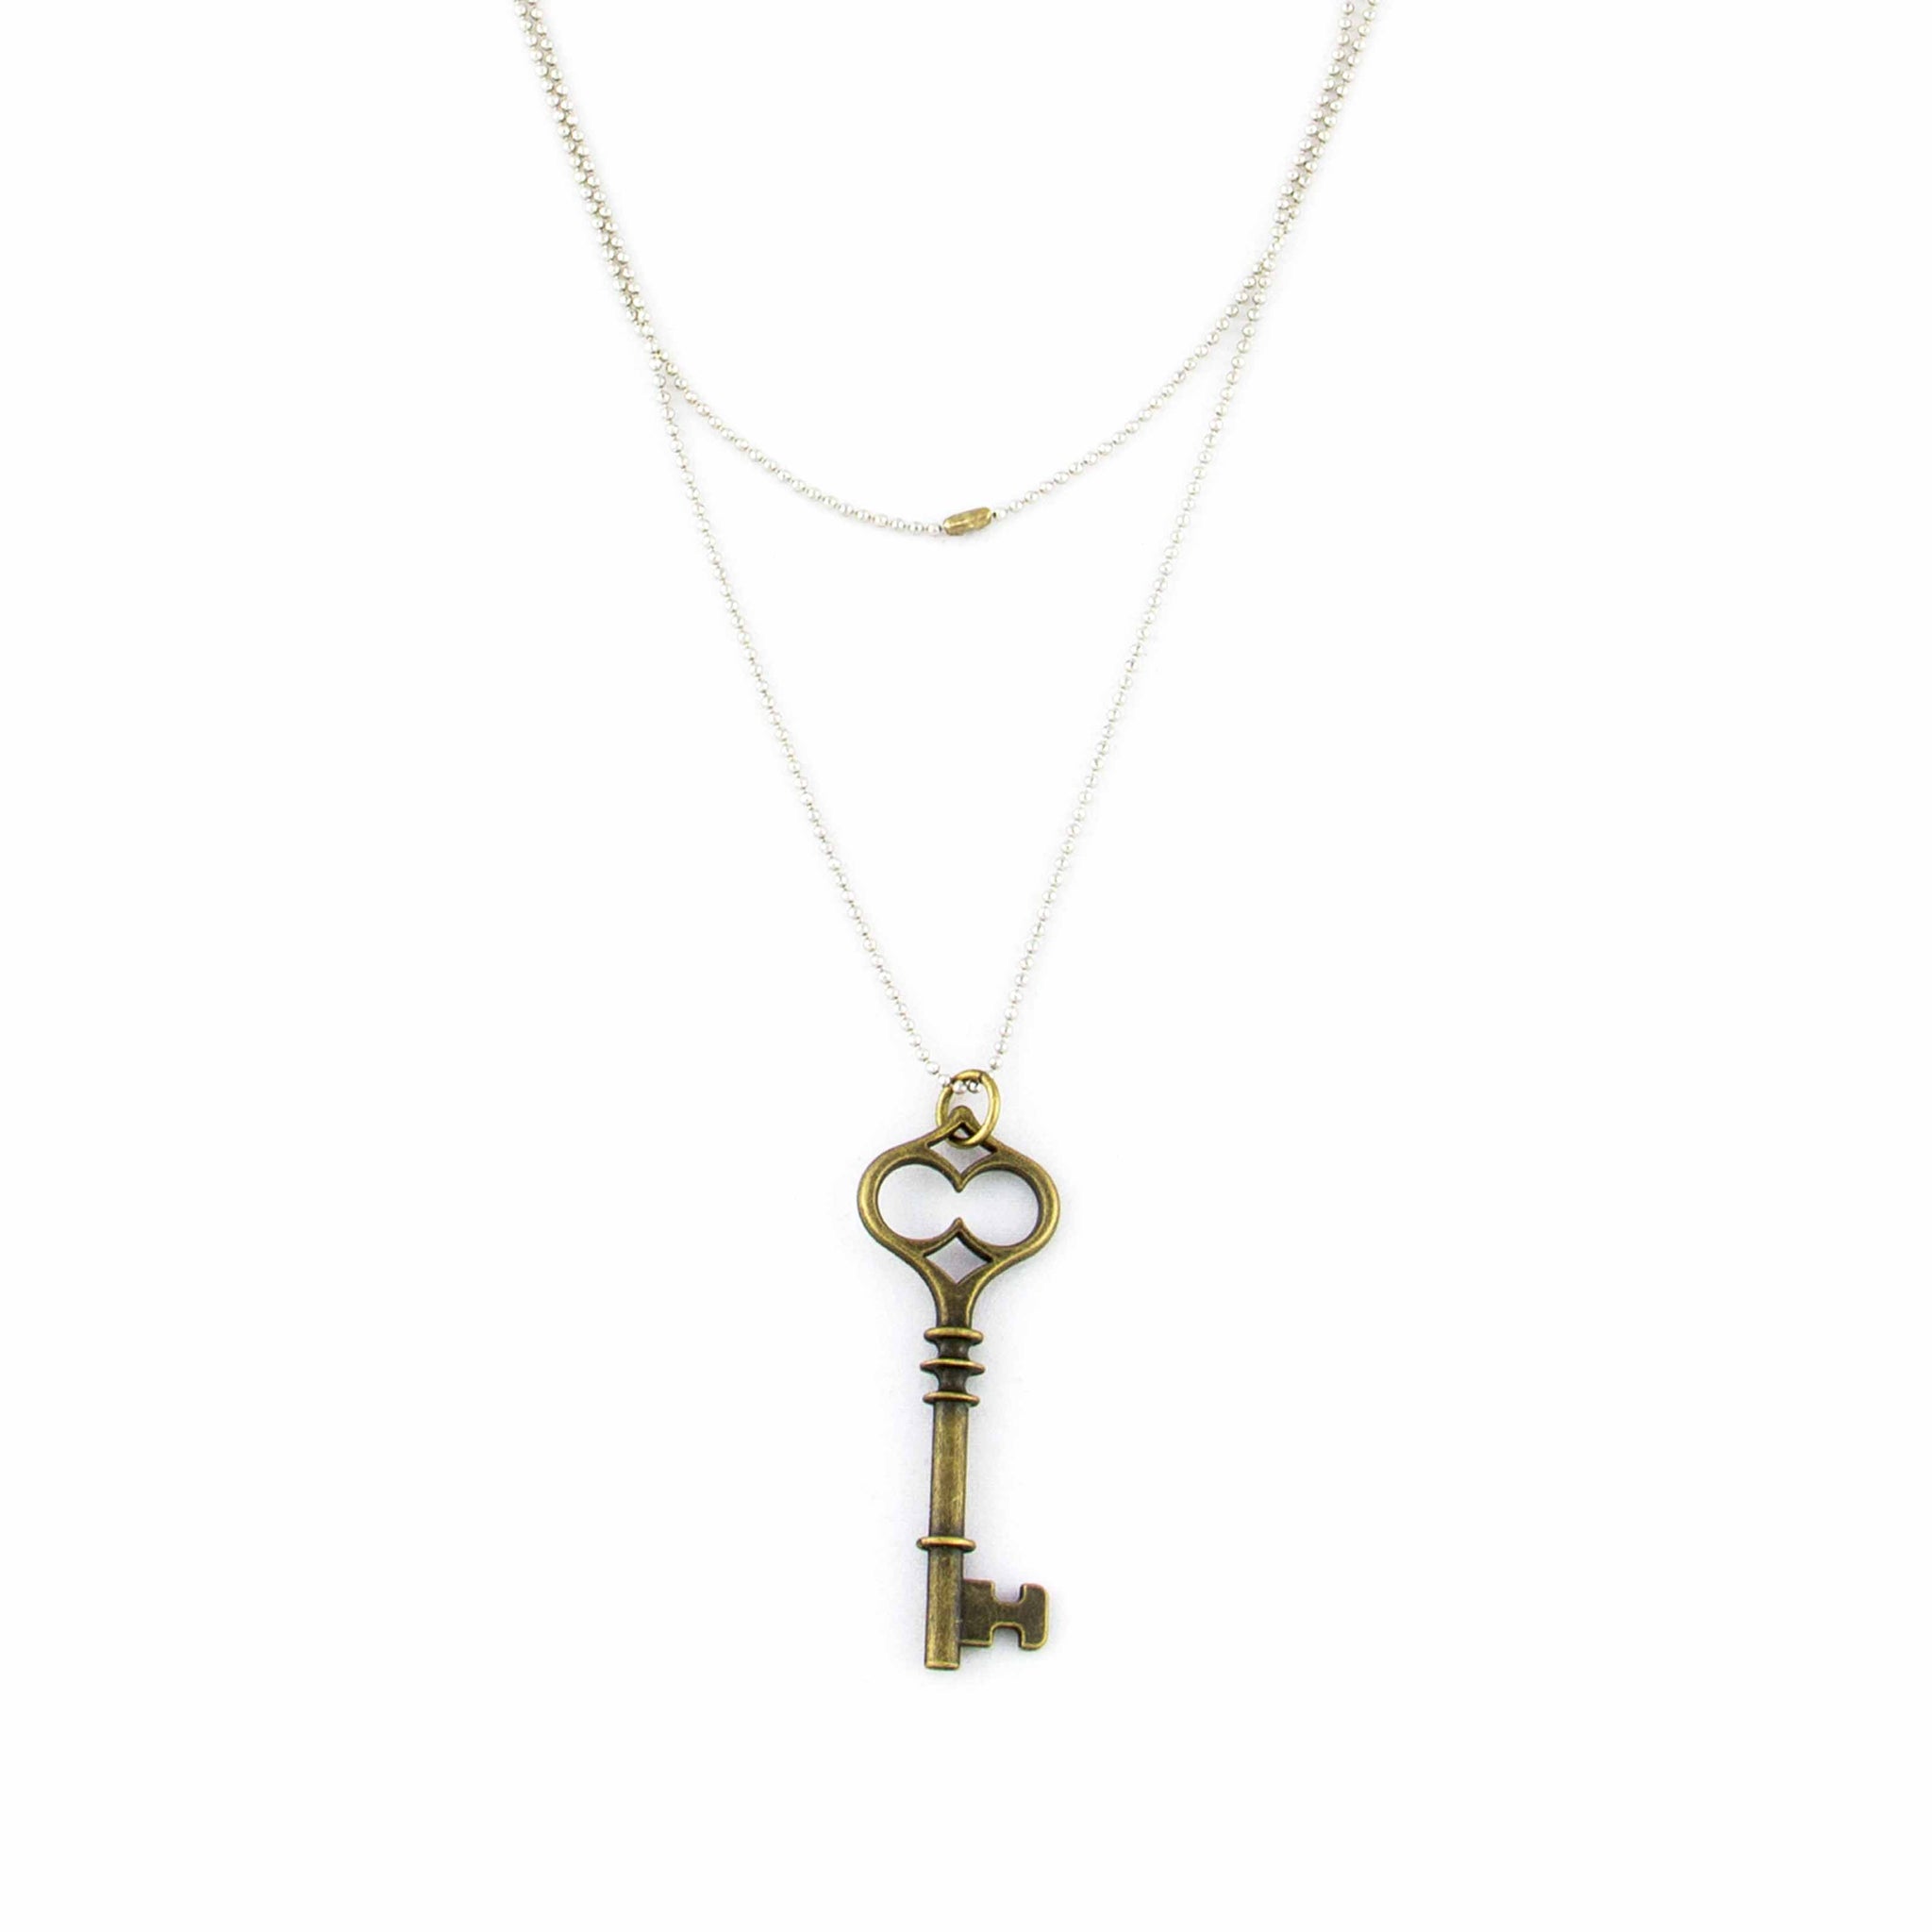 Long Necklace with Key Pendant